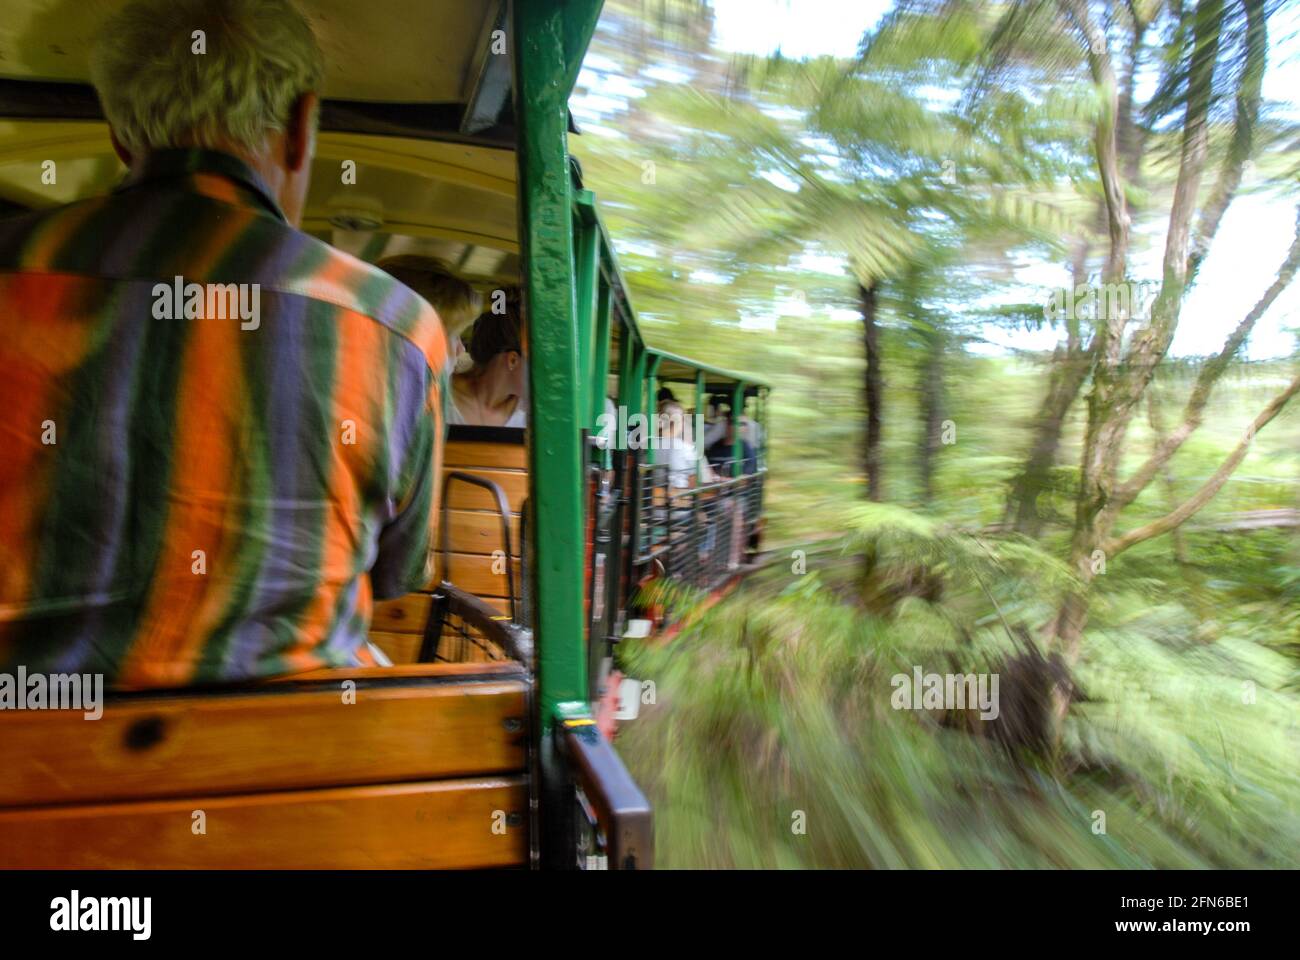 A train ride on the narrow-gauge Driving Creek Railway brings tourists from the pottery business near Coromandel up into dense bushland and forest with native trees. Stock Photo